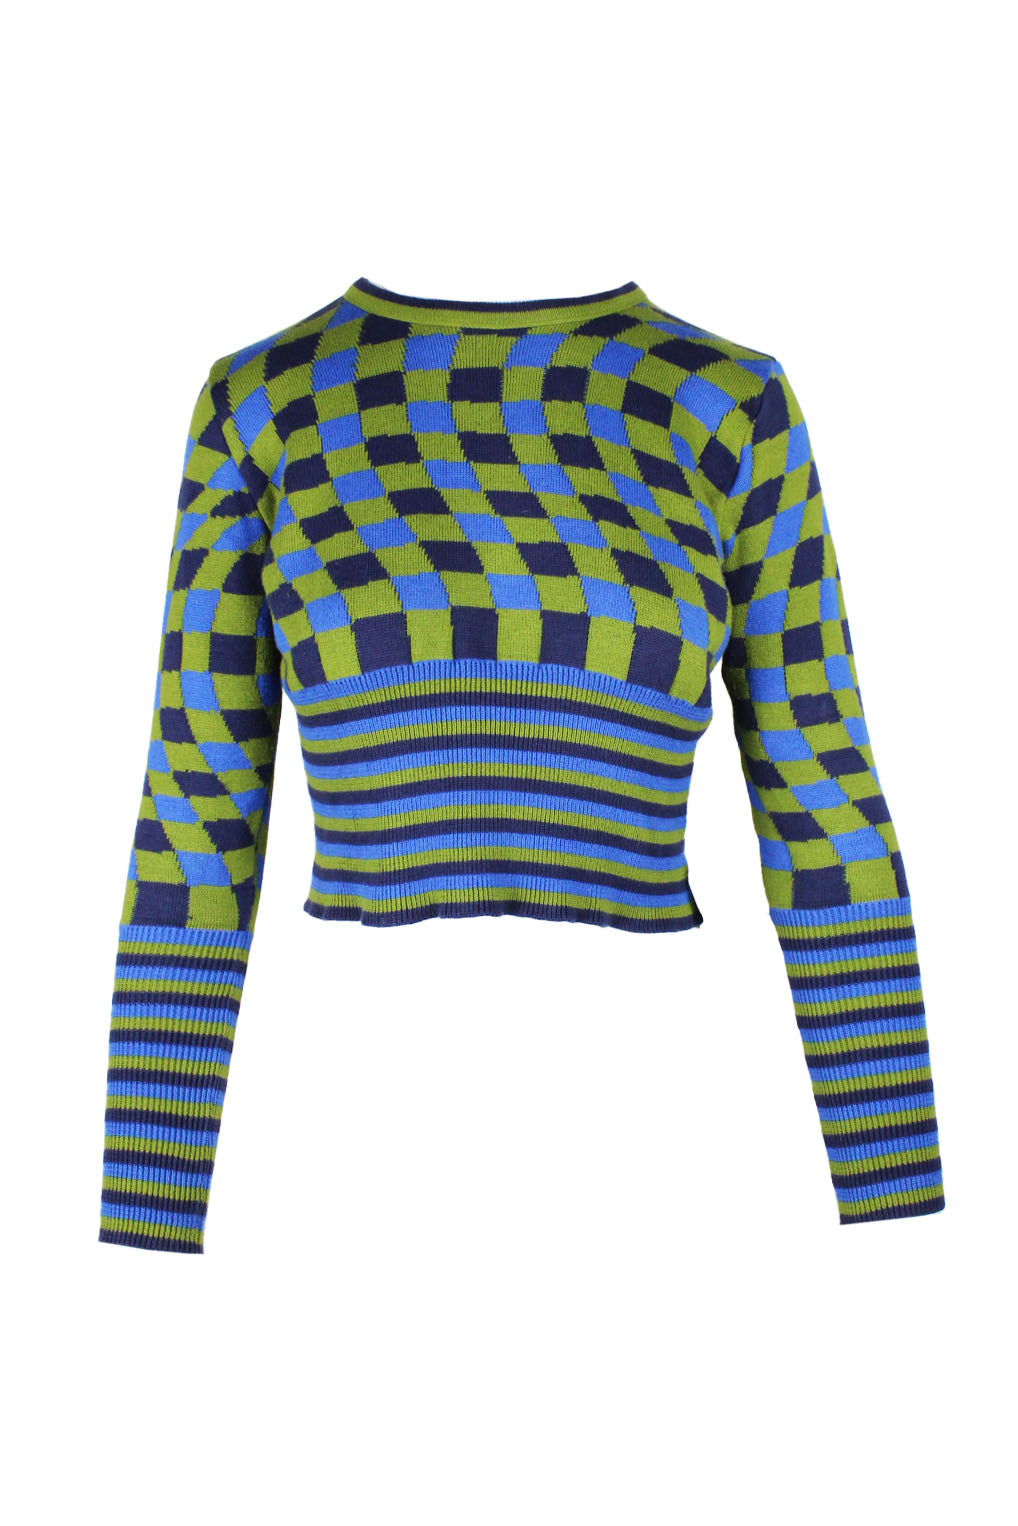 front of molly goddard green and blue long sleeve knit top. features crew neckline, ribbed trim, abstract plaid/stripes pattern throughout, and slim fit. 